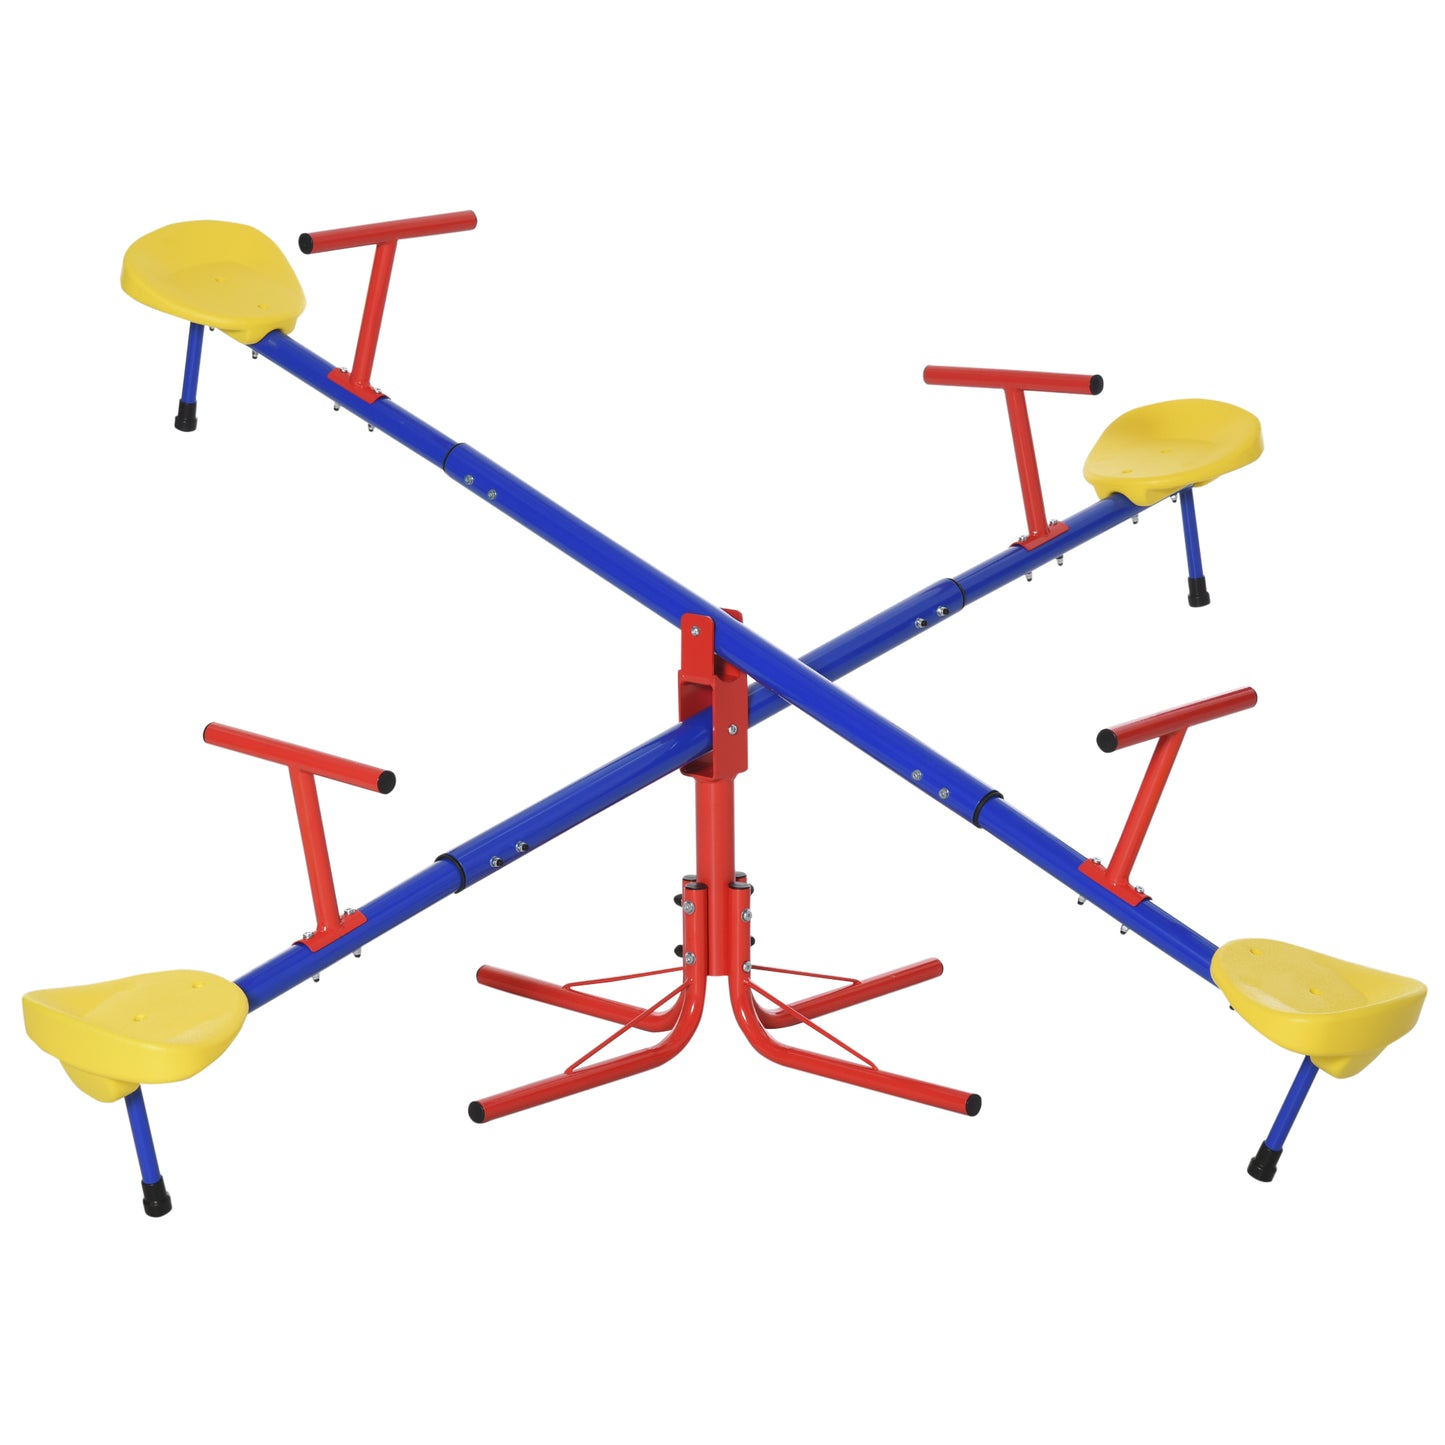 Outsunny Kids Metal Seesaw Teeter Totter Children's Playground Equipment 4 Seats